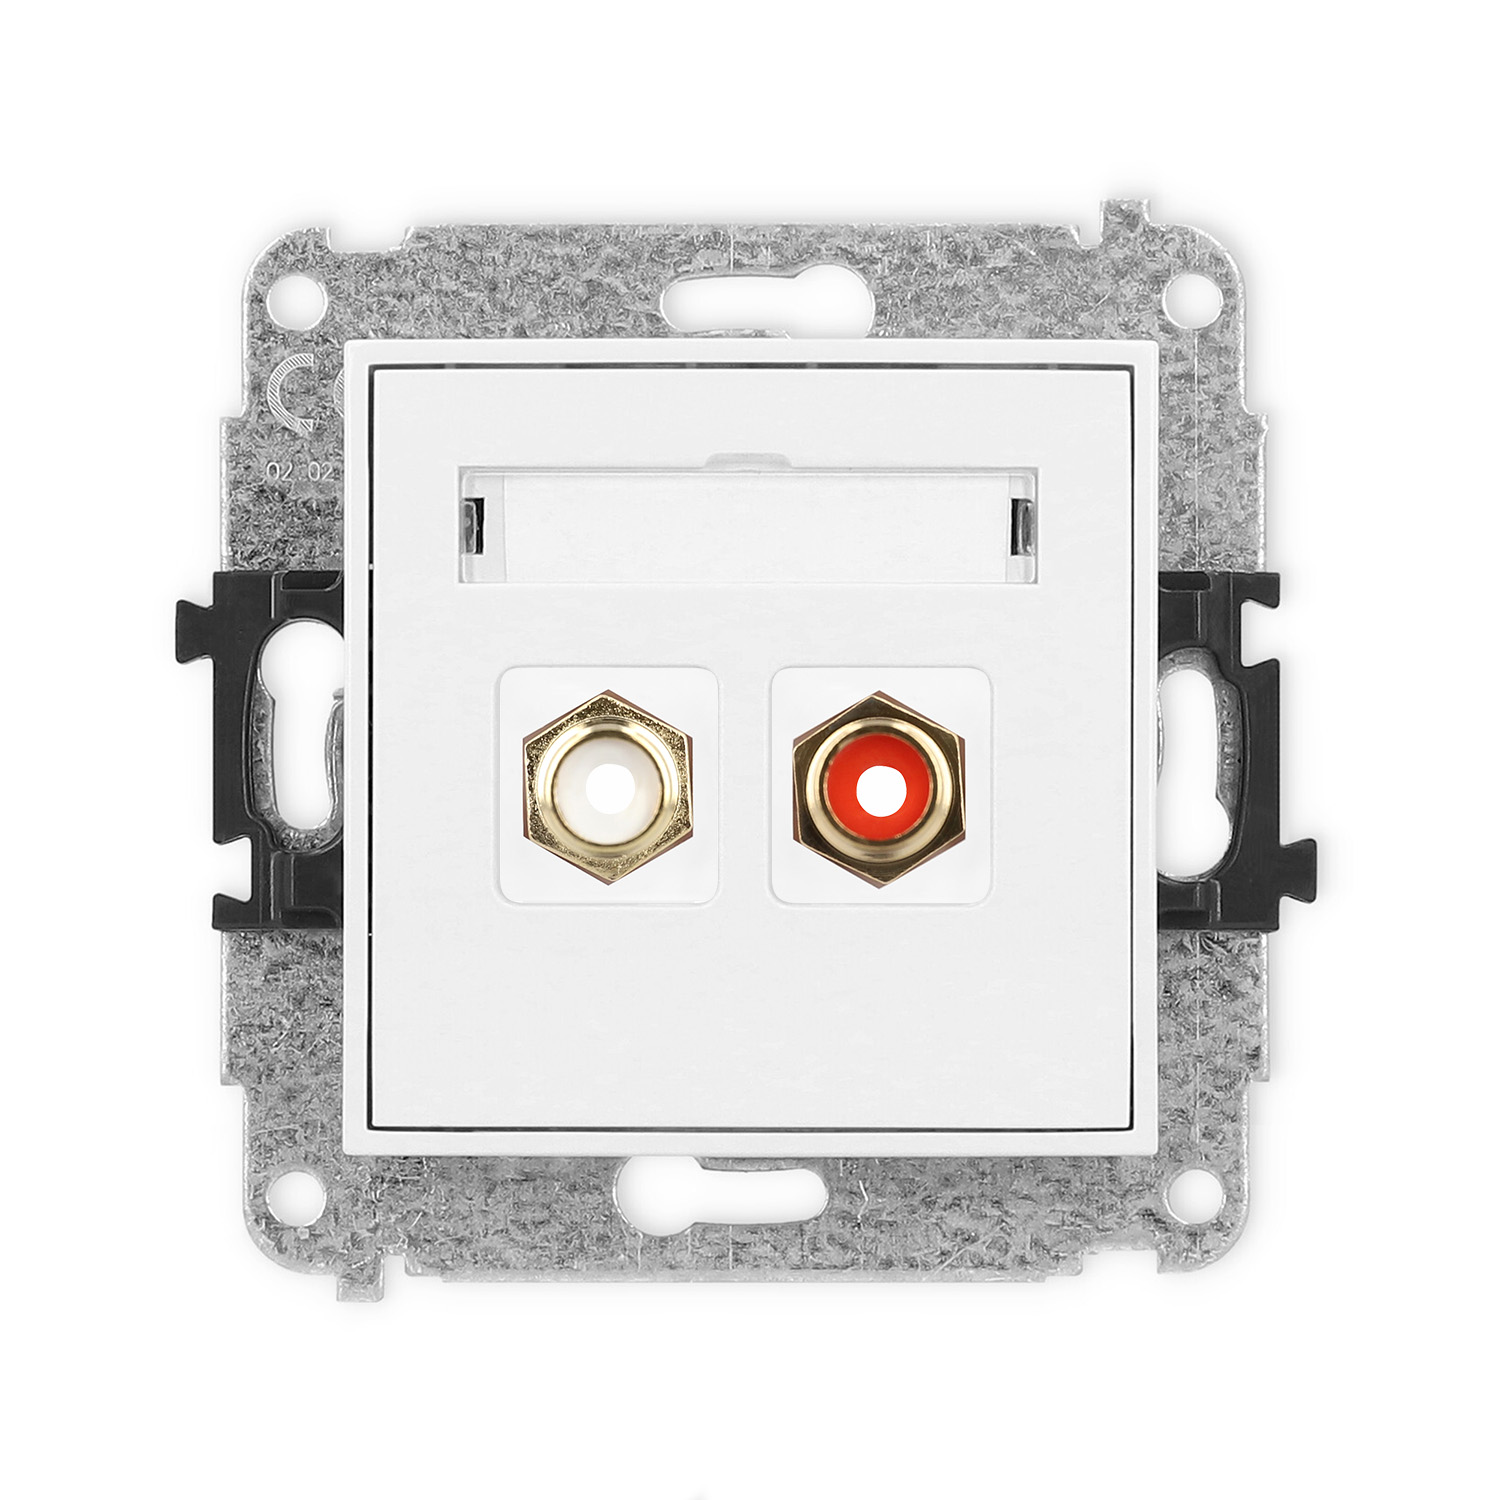 RCA double socket (cinch type-white and red, gold-plated) mechanism